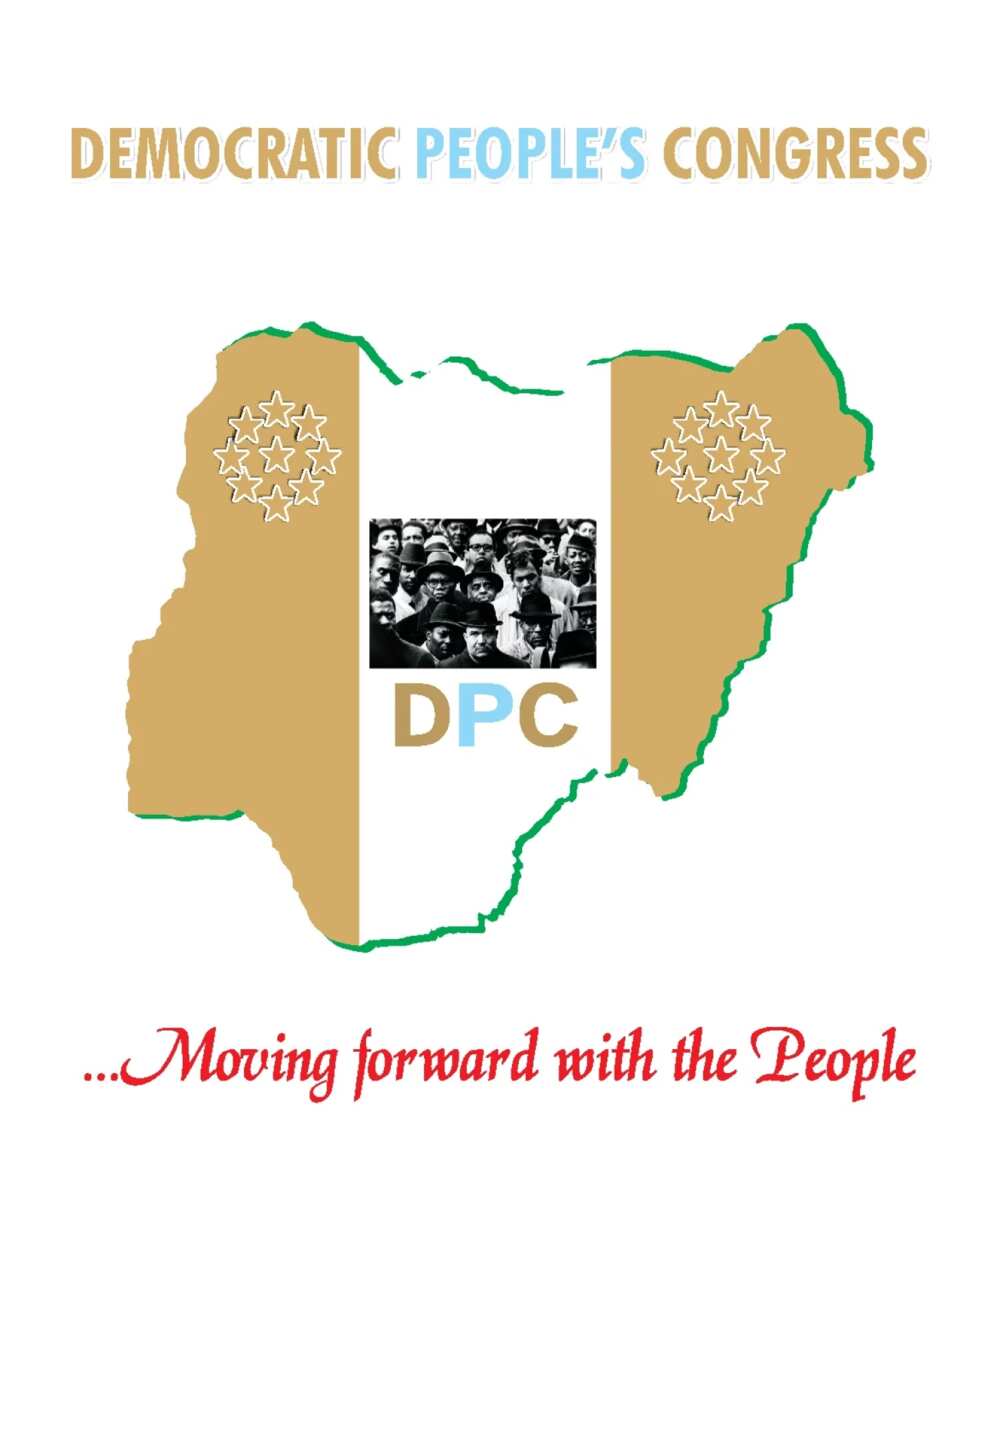 Nigerian political parties logo and full name DPC